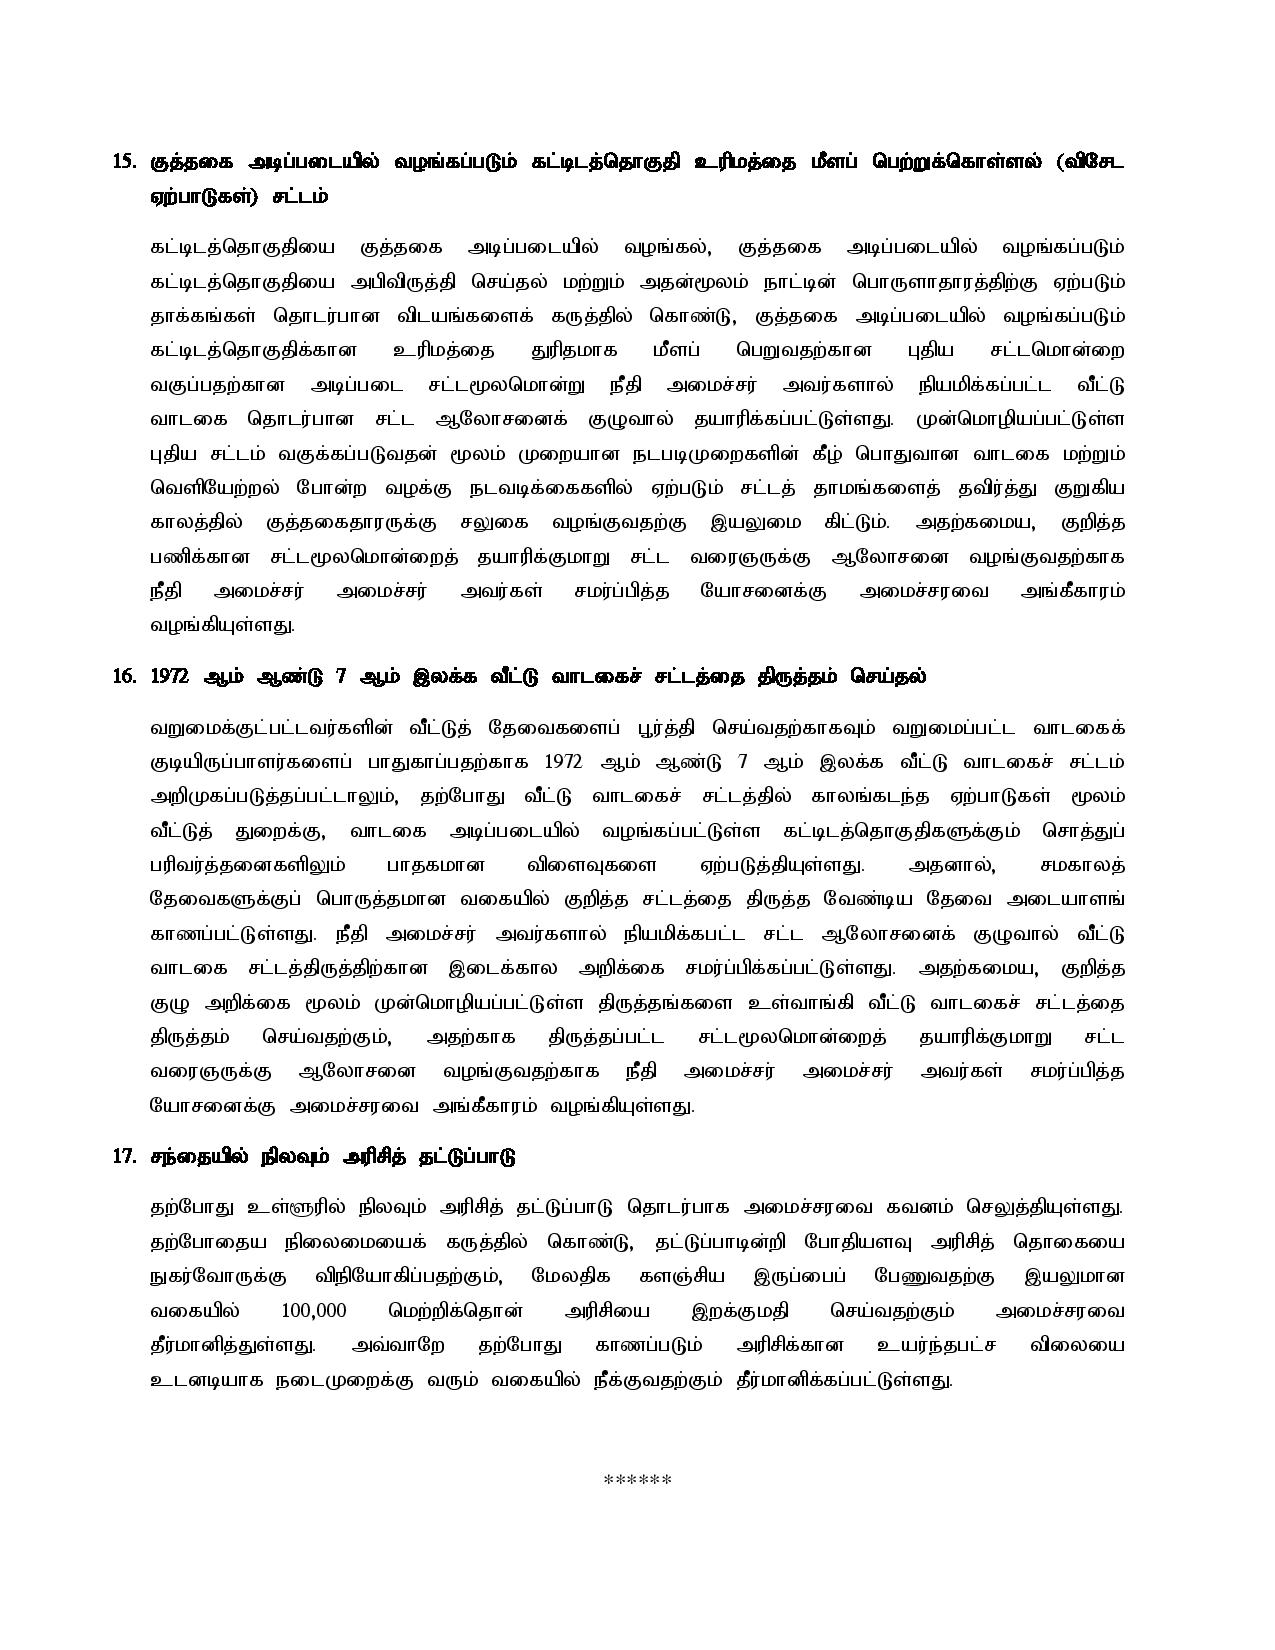 Cabinet Decisions on 27.09.2021 Tamil page 006